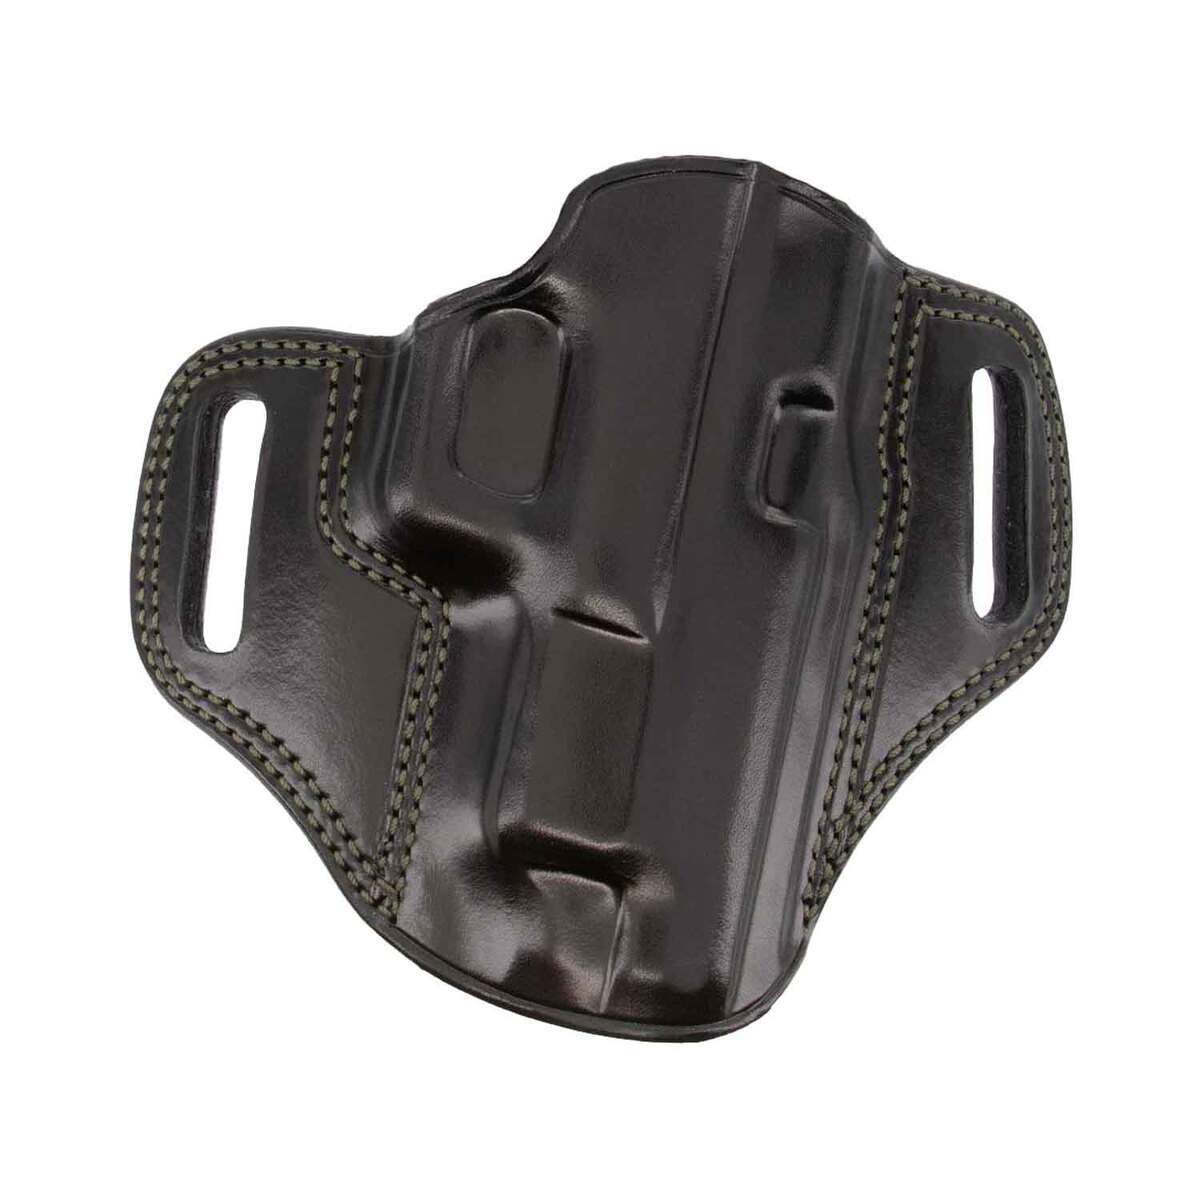 Galco Combat Master Glock 17 Outside The Waistband Right Holster